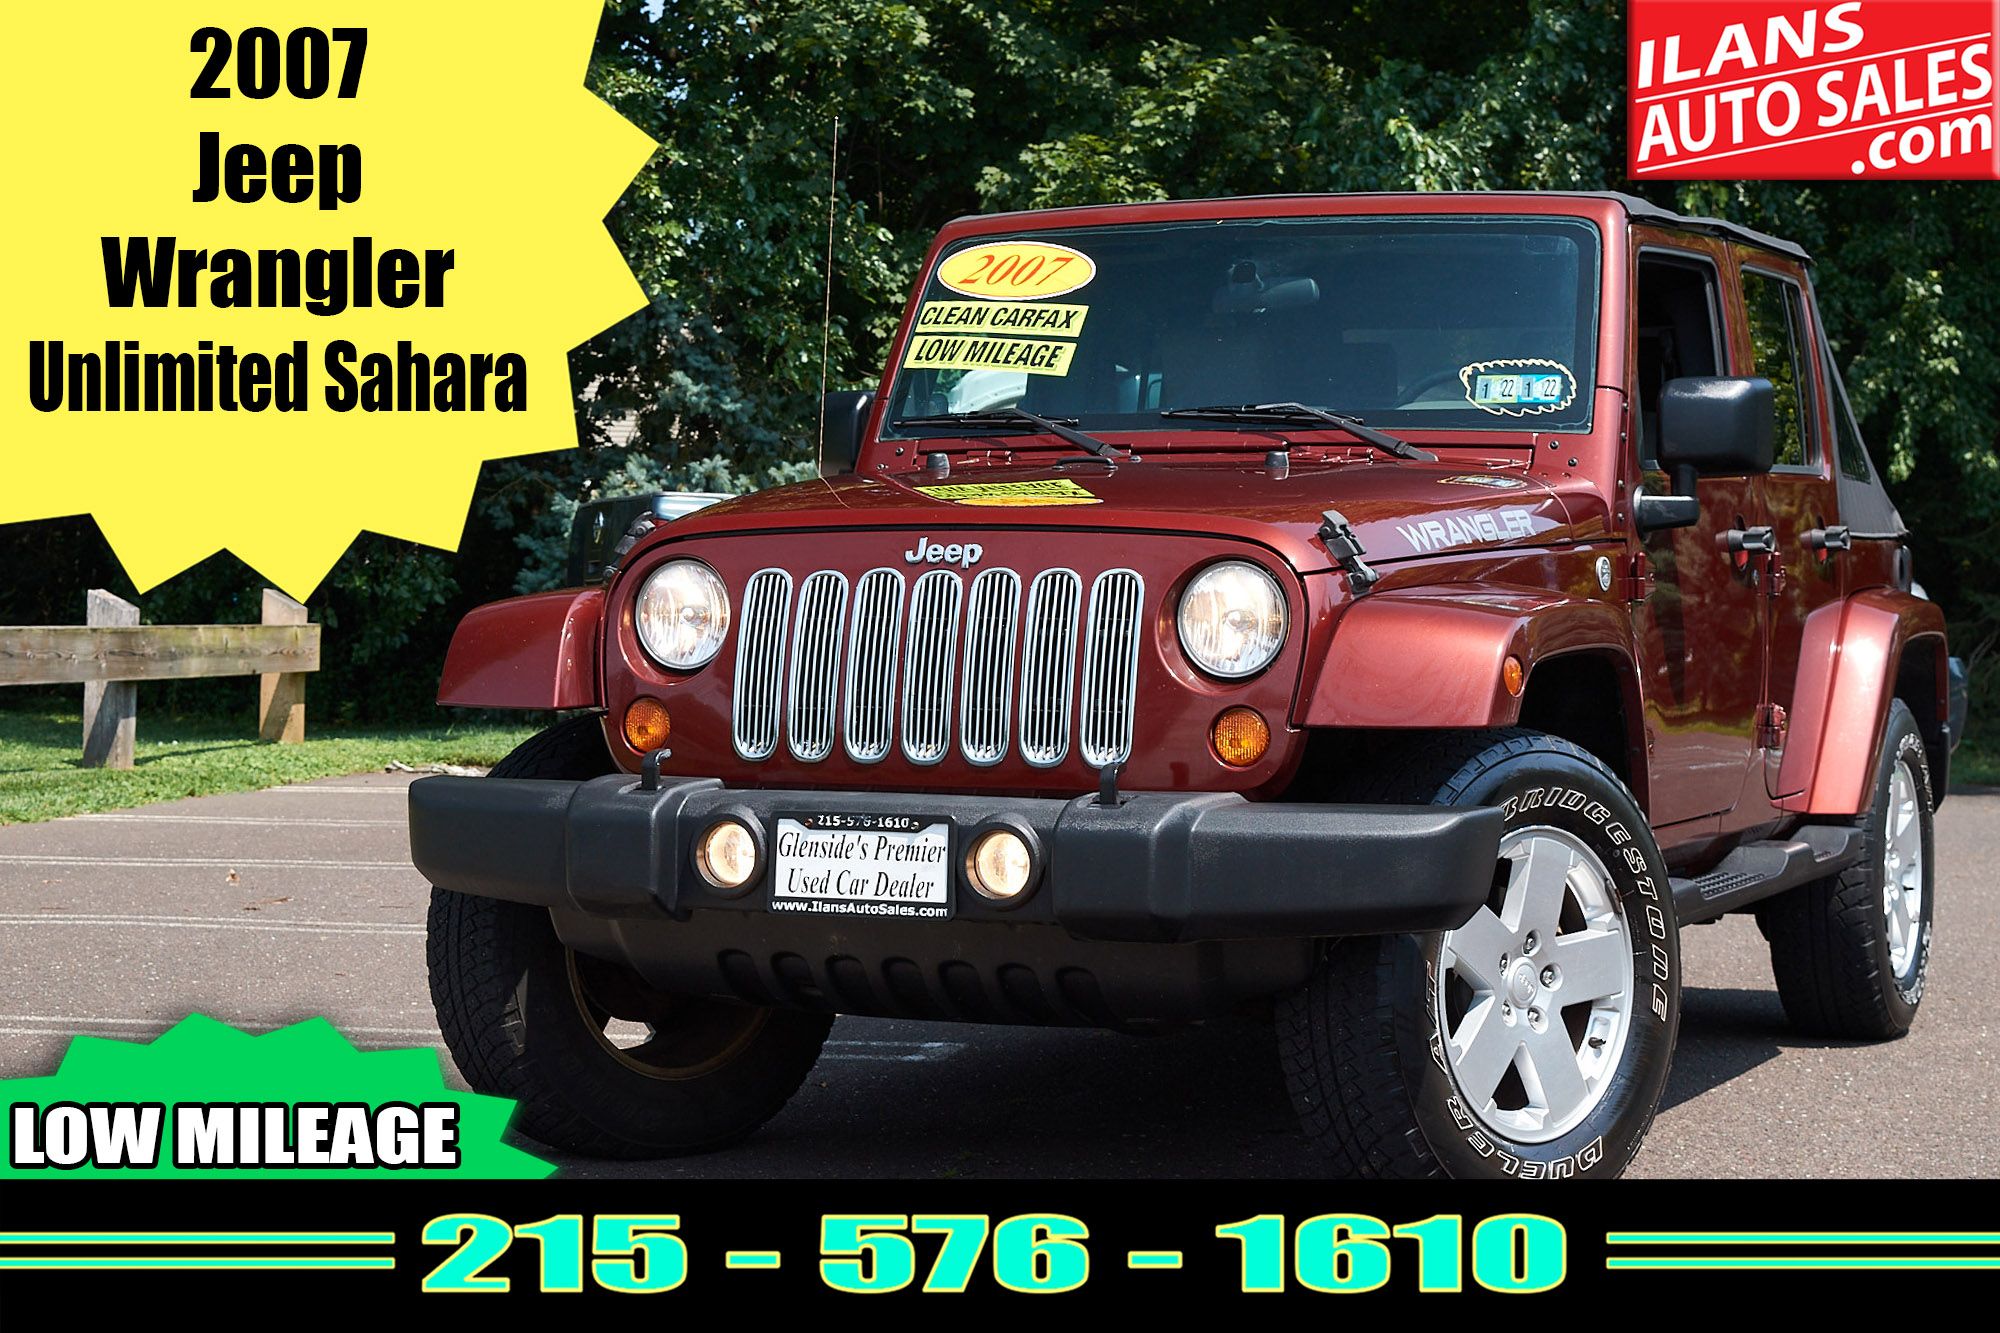 Used Jeep Wrangler for Sale in Broomall, PA 